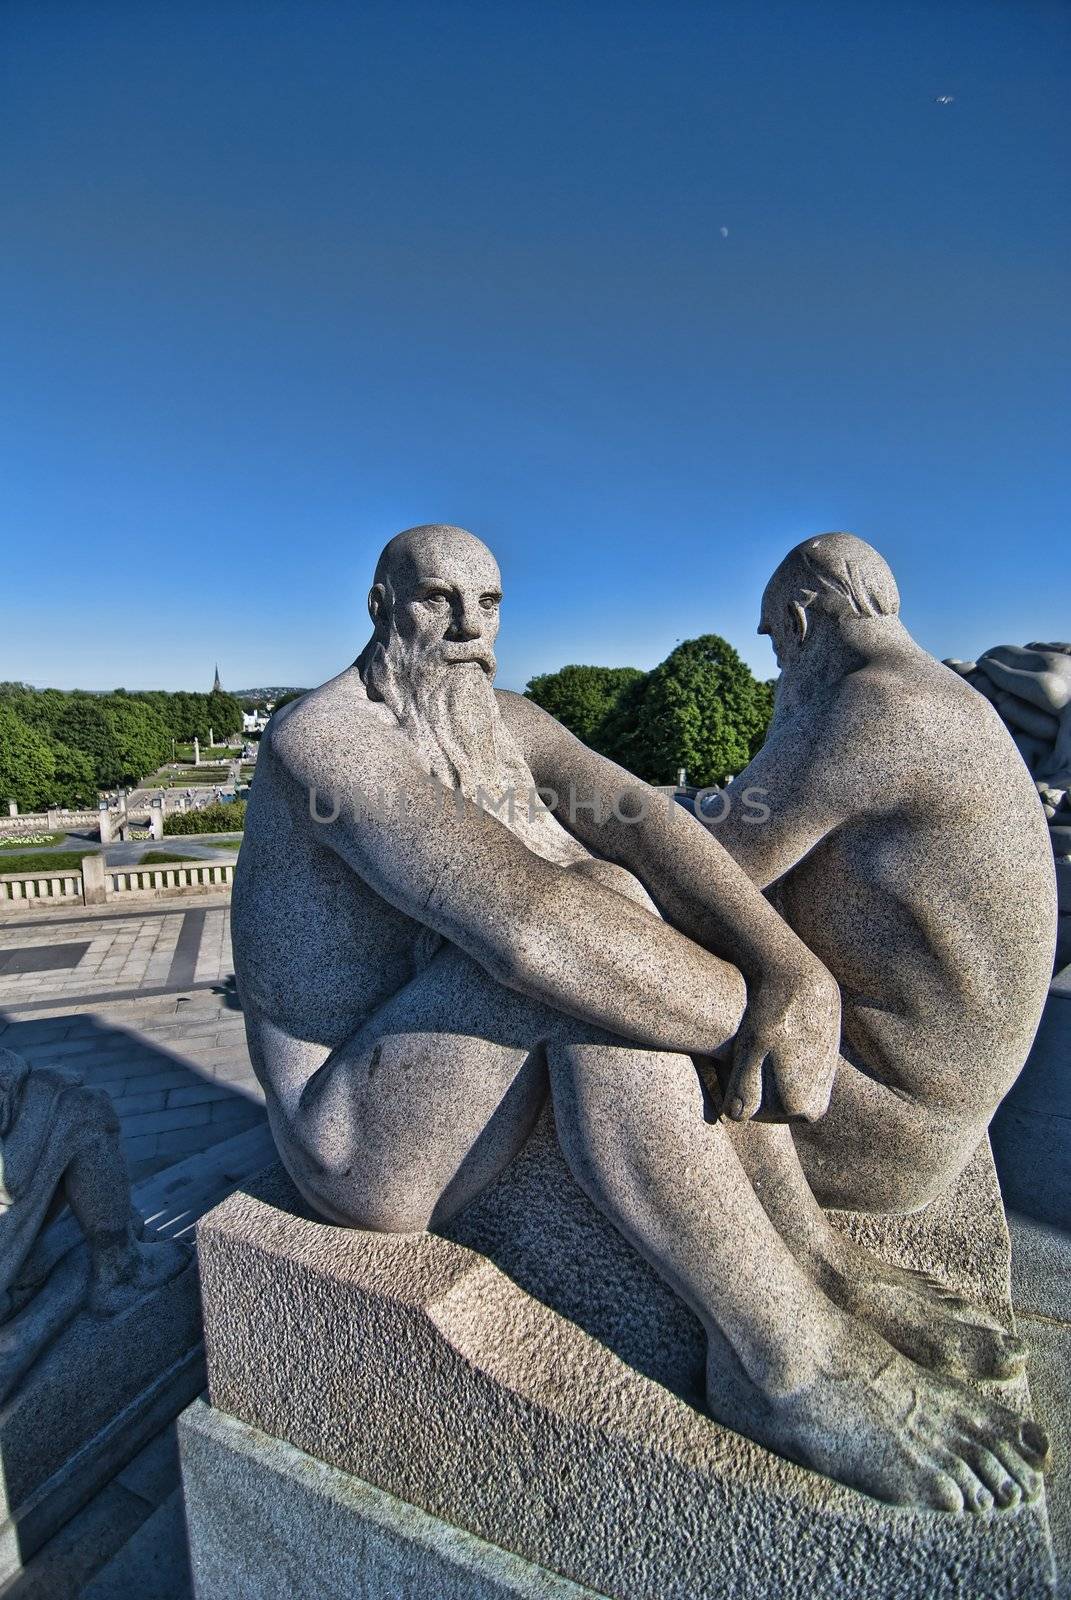 Statue in a Park of Oslo, Norway, May 2009 by jovannig